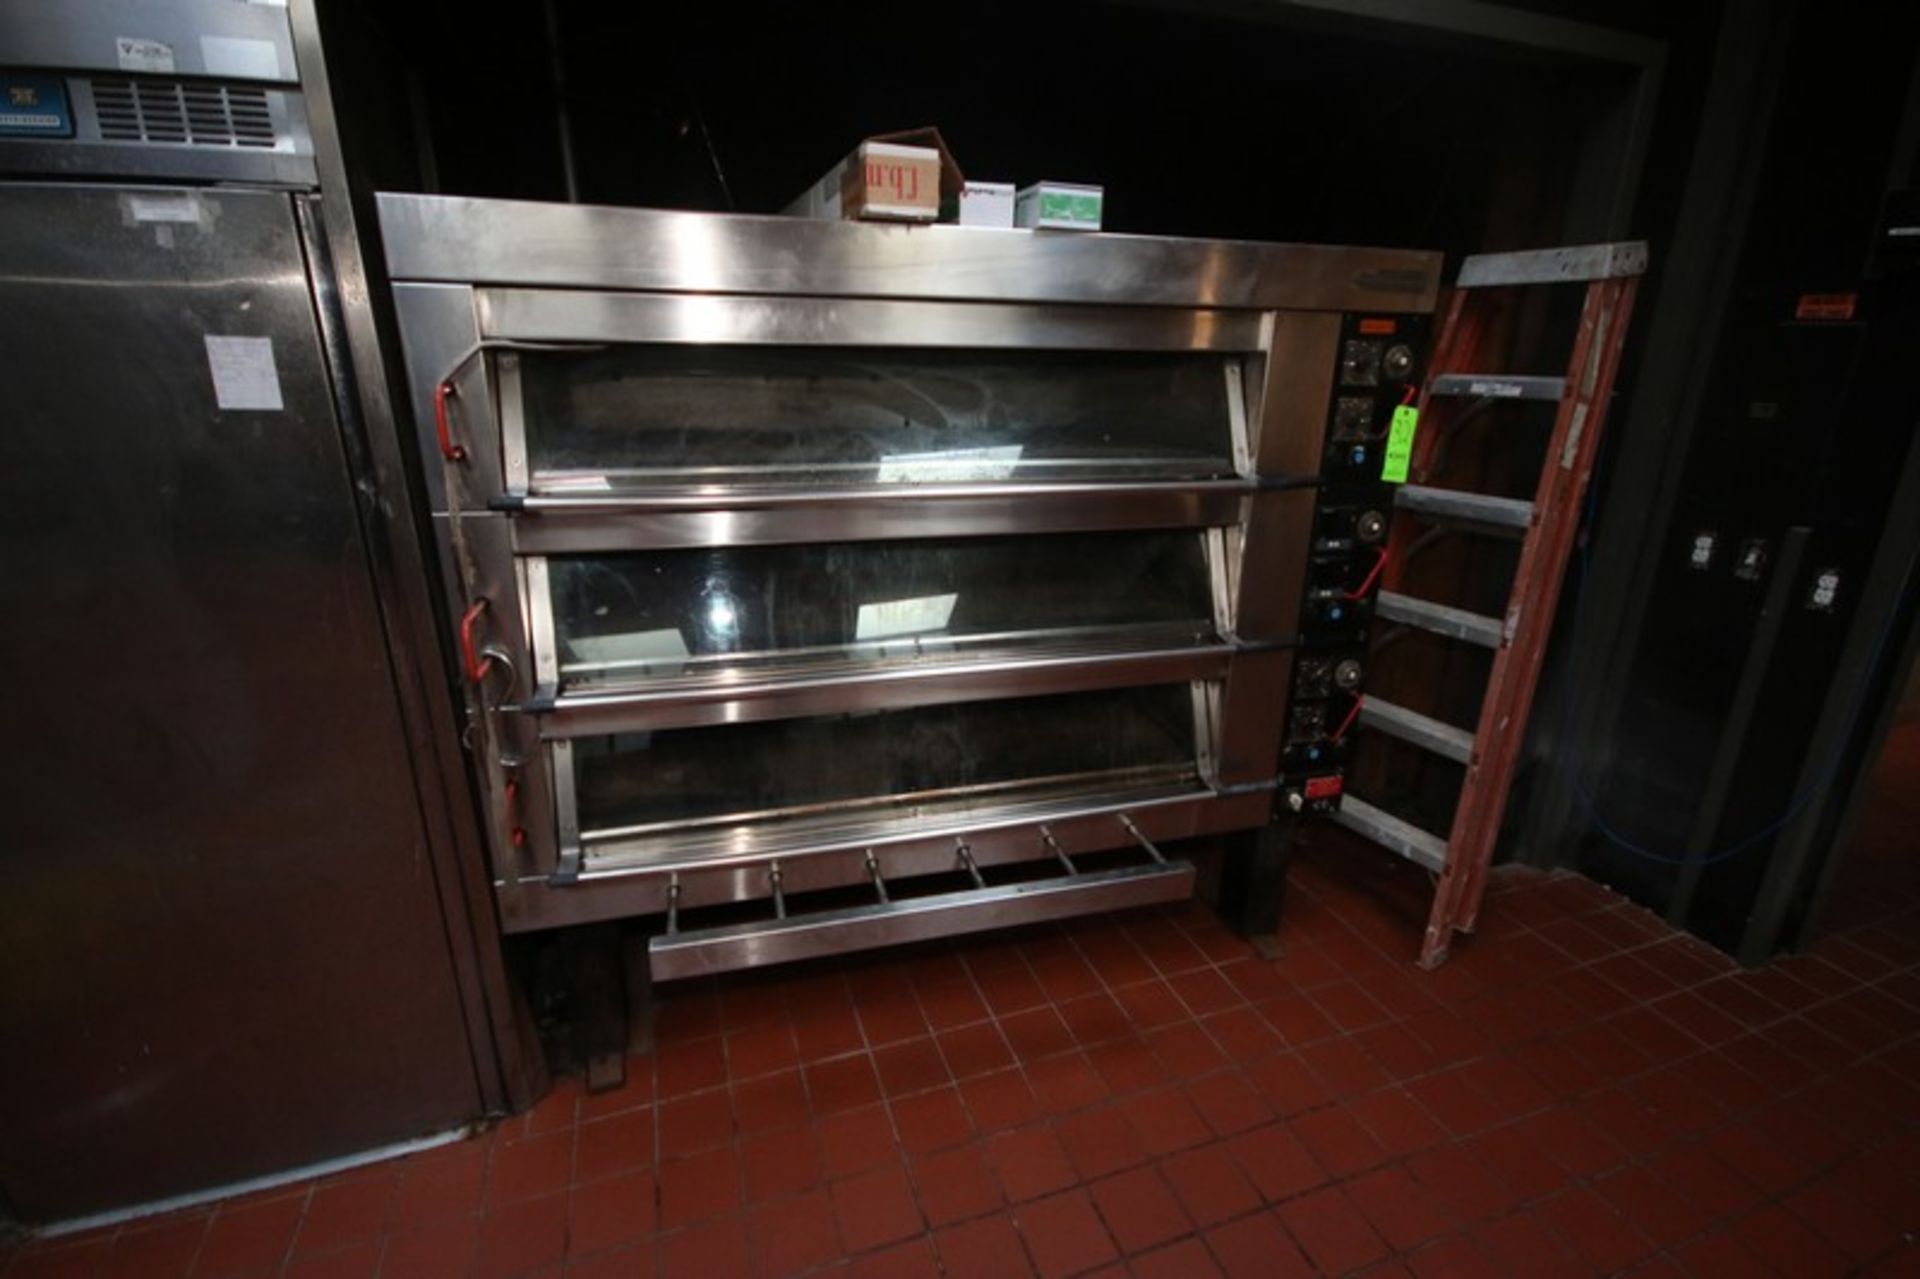 Bongard S/S Triple Decker Steam Injection Oven, with 3-Compartments, 240 Volts, Overall Dims.: Aprox - Image 2 of 4